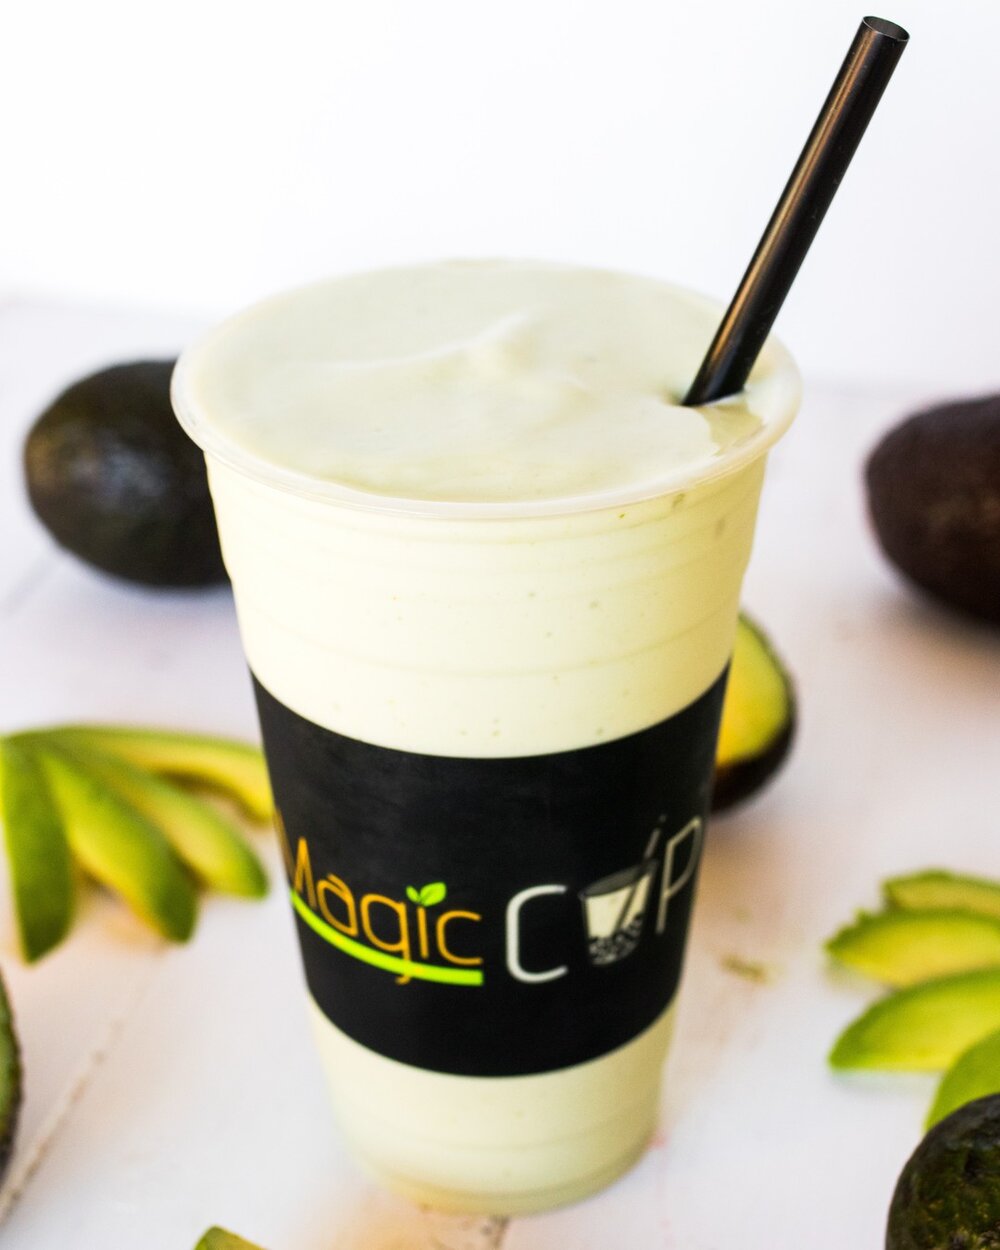 Creamy, sweet, and irresistibly green, our Avocado Smoothie is a fresh (and refreshing!) way to get your daily dose of this highly nutritious fruit. 💚🌪

Stop by Magic Cup and try one today!

A small 🚨warning🚨, though: Once you get a taste of our smoothie, you might end up ditching your avocado toast altogether! #sorrynotsorry 😂🤣